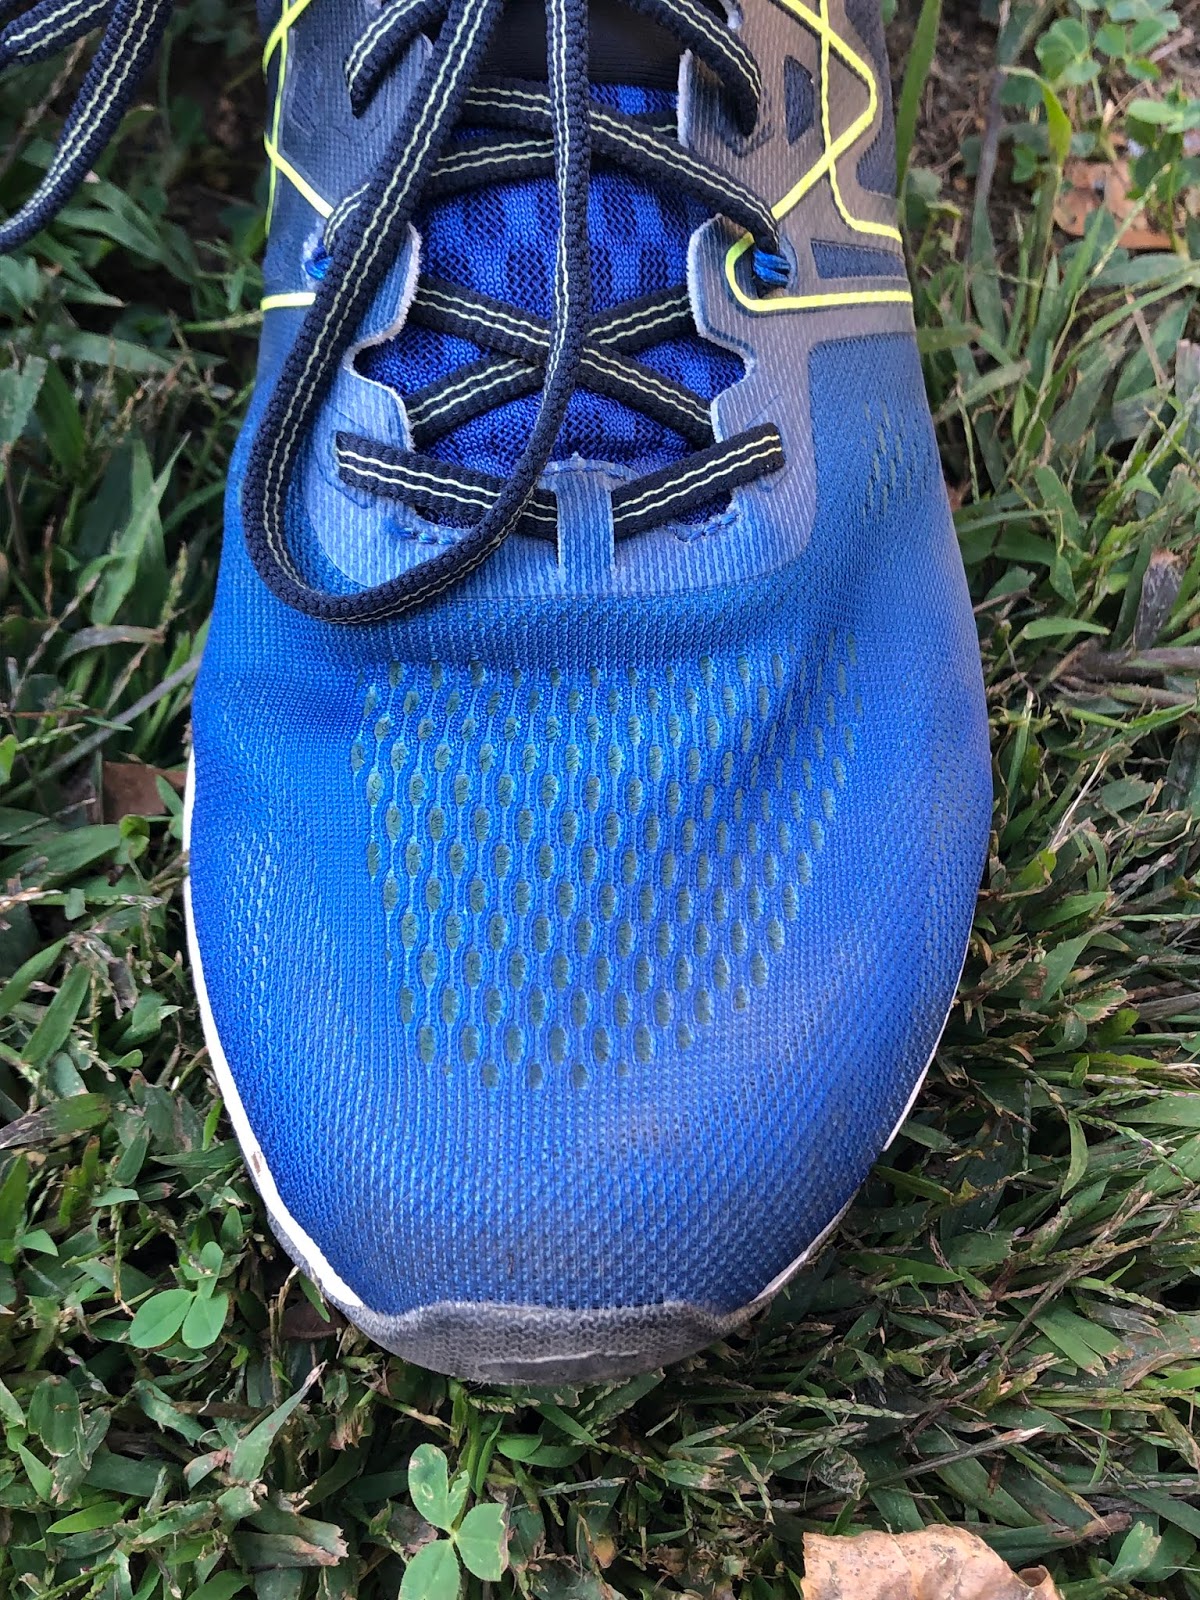 Karhu Fusion Ortix 2020 Multiple Tester Review - DOCTORS OF RUNNING